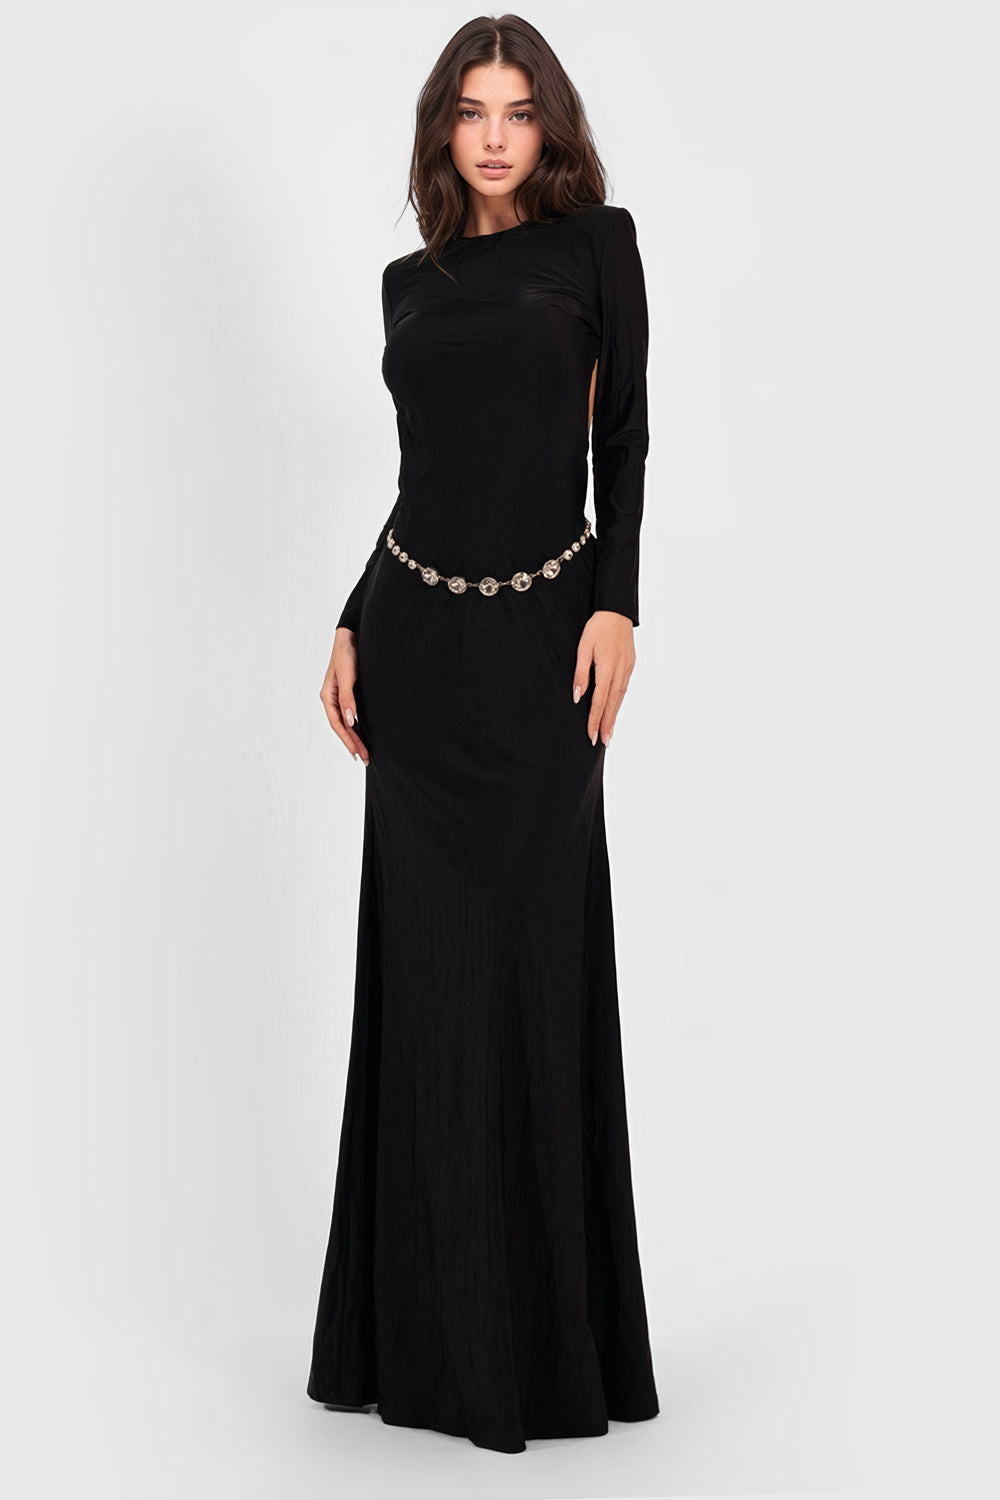 Backless Maxi Dress with Long Sleeves - Black